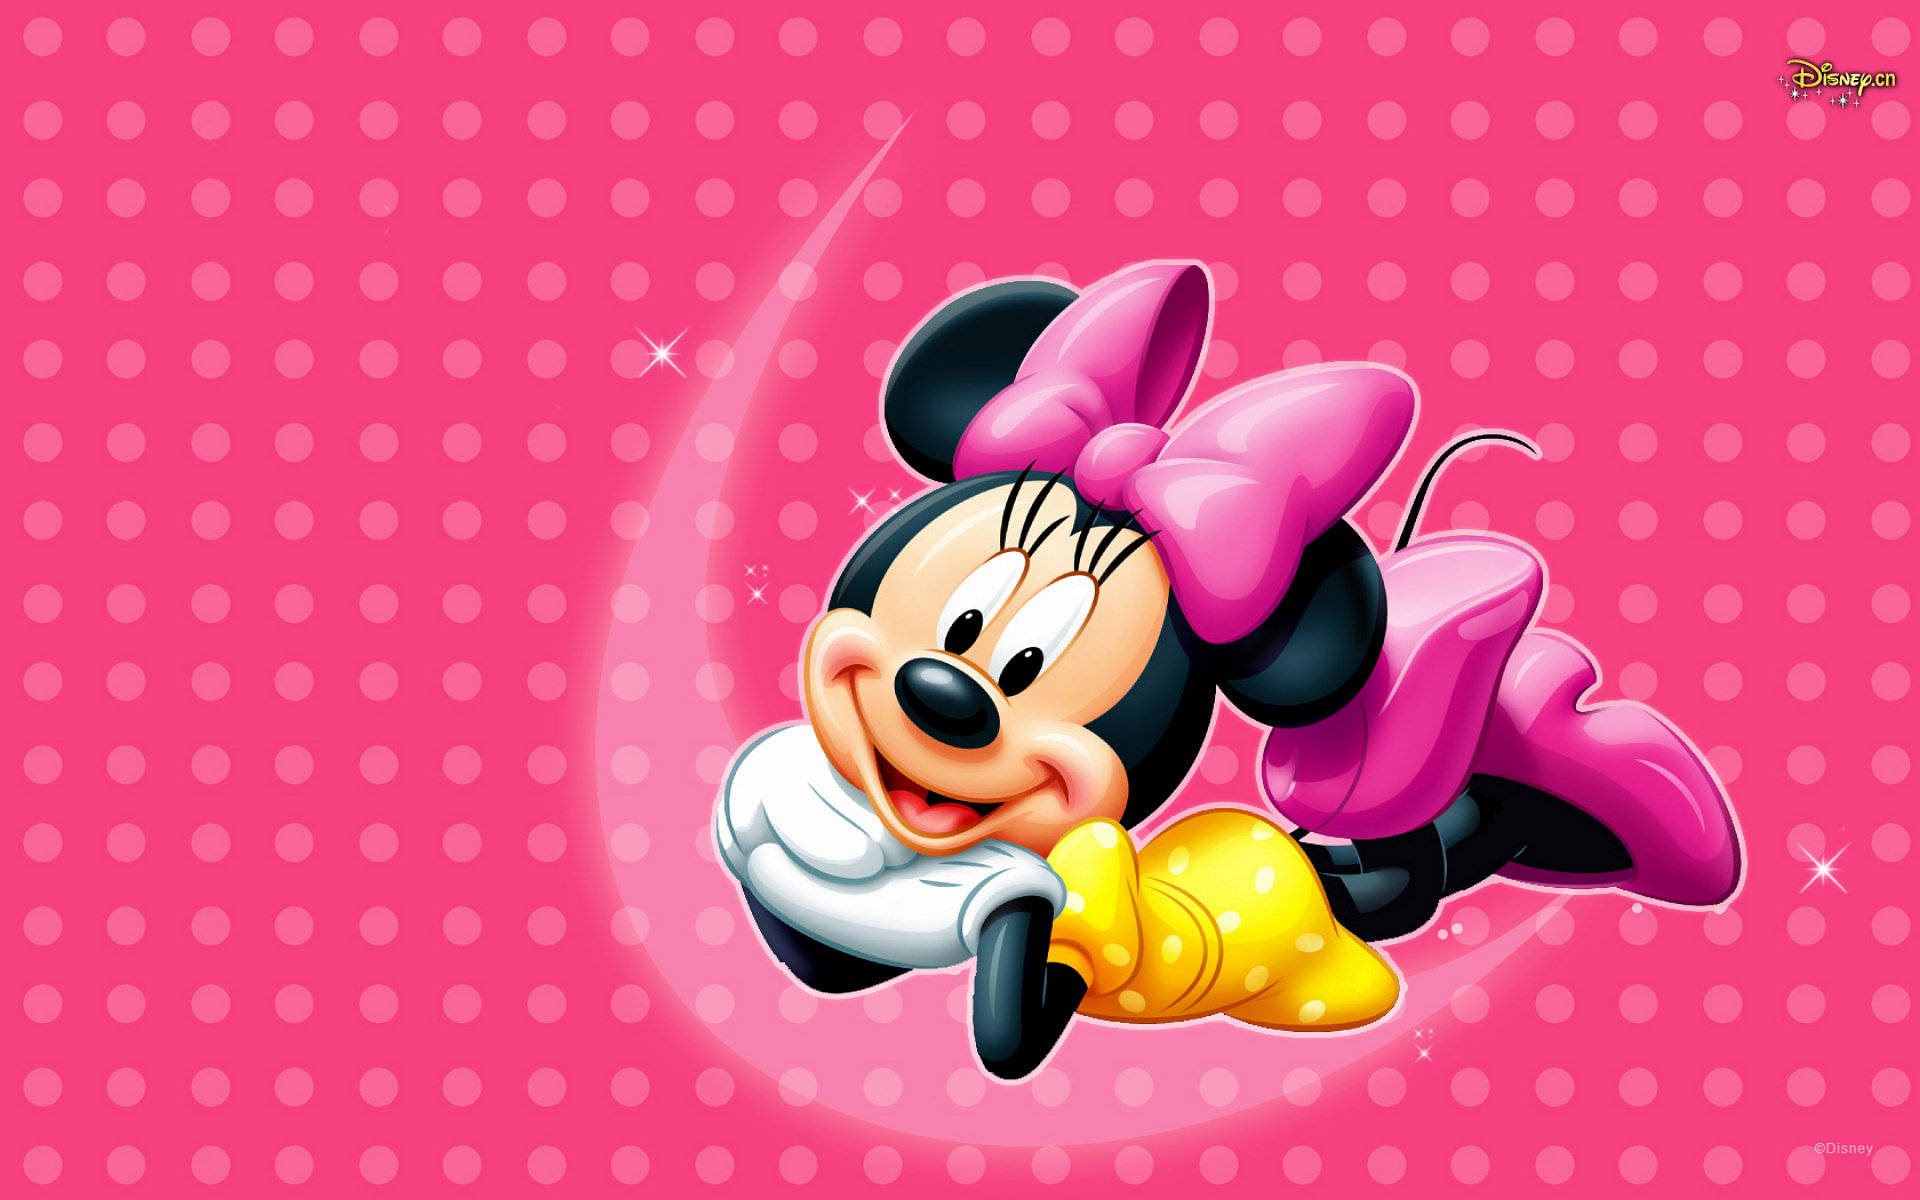 Celebrate the joy of childhood with Disney's Minnie Mouse! Wallpaper